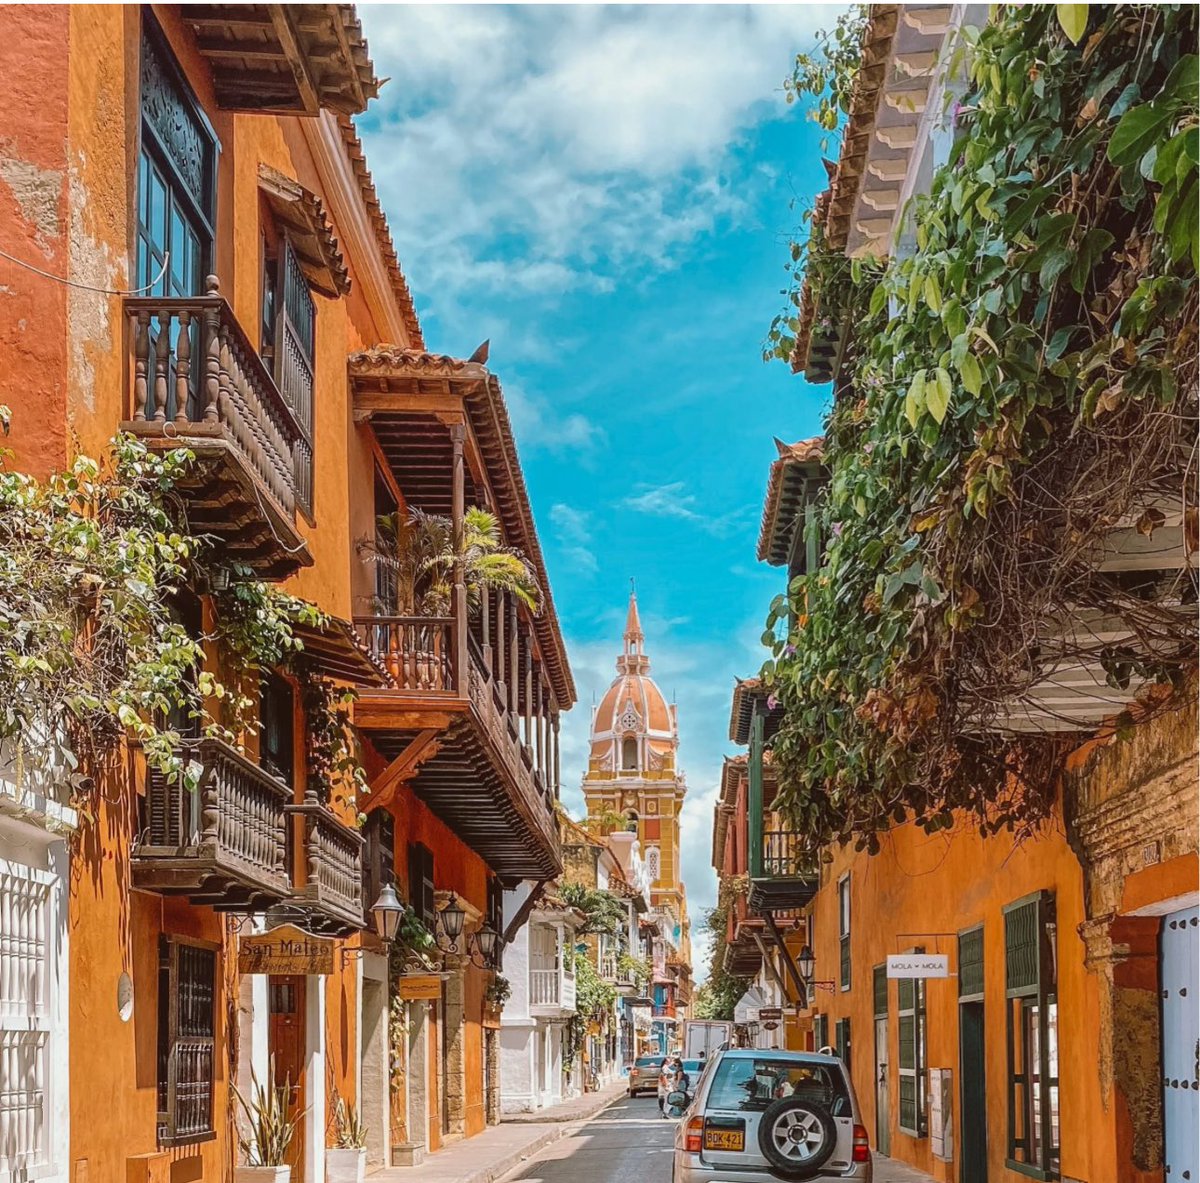 Heading to Colombia to speak about:
Pediatric Spinal anatomy and spinal angiography
Pediatric Stroke
Pediatric Nonvascular Spine Procedures
Revolutionizing Pediatric Neurointerventions

💃 💃 💃 
🎶 Cartagena…cha cha cha…Cartagena 🎶